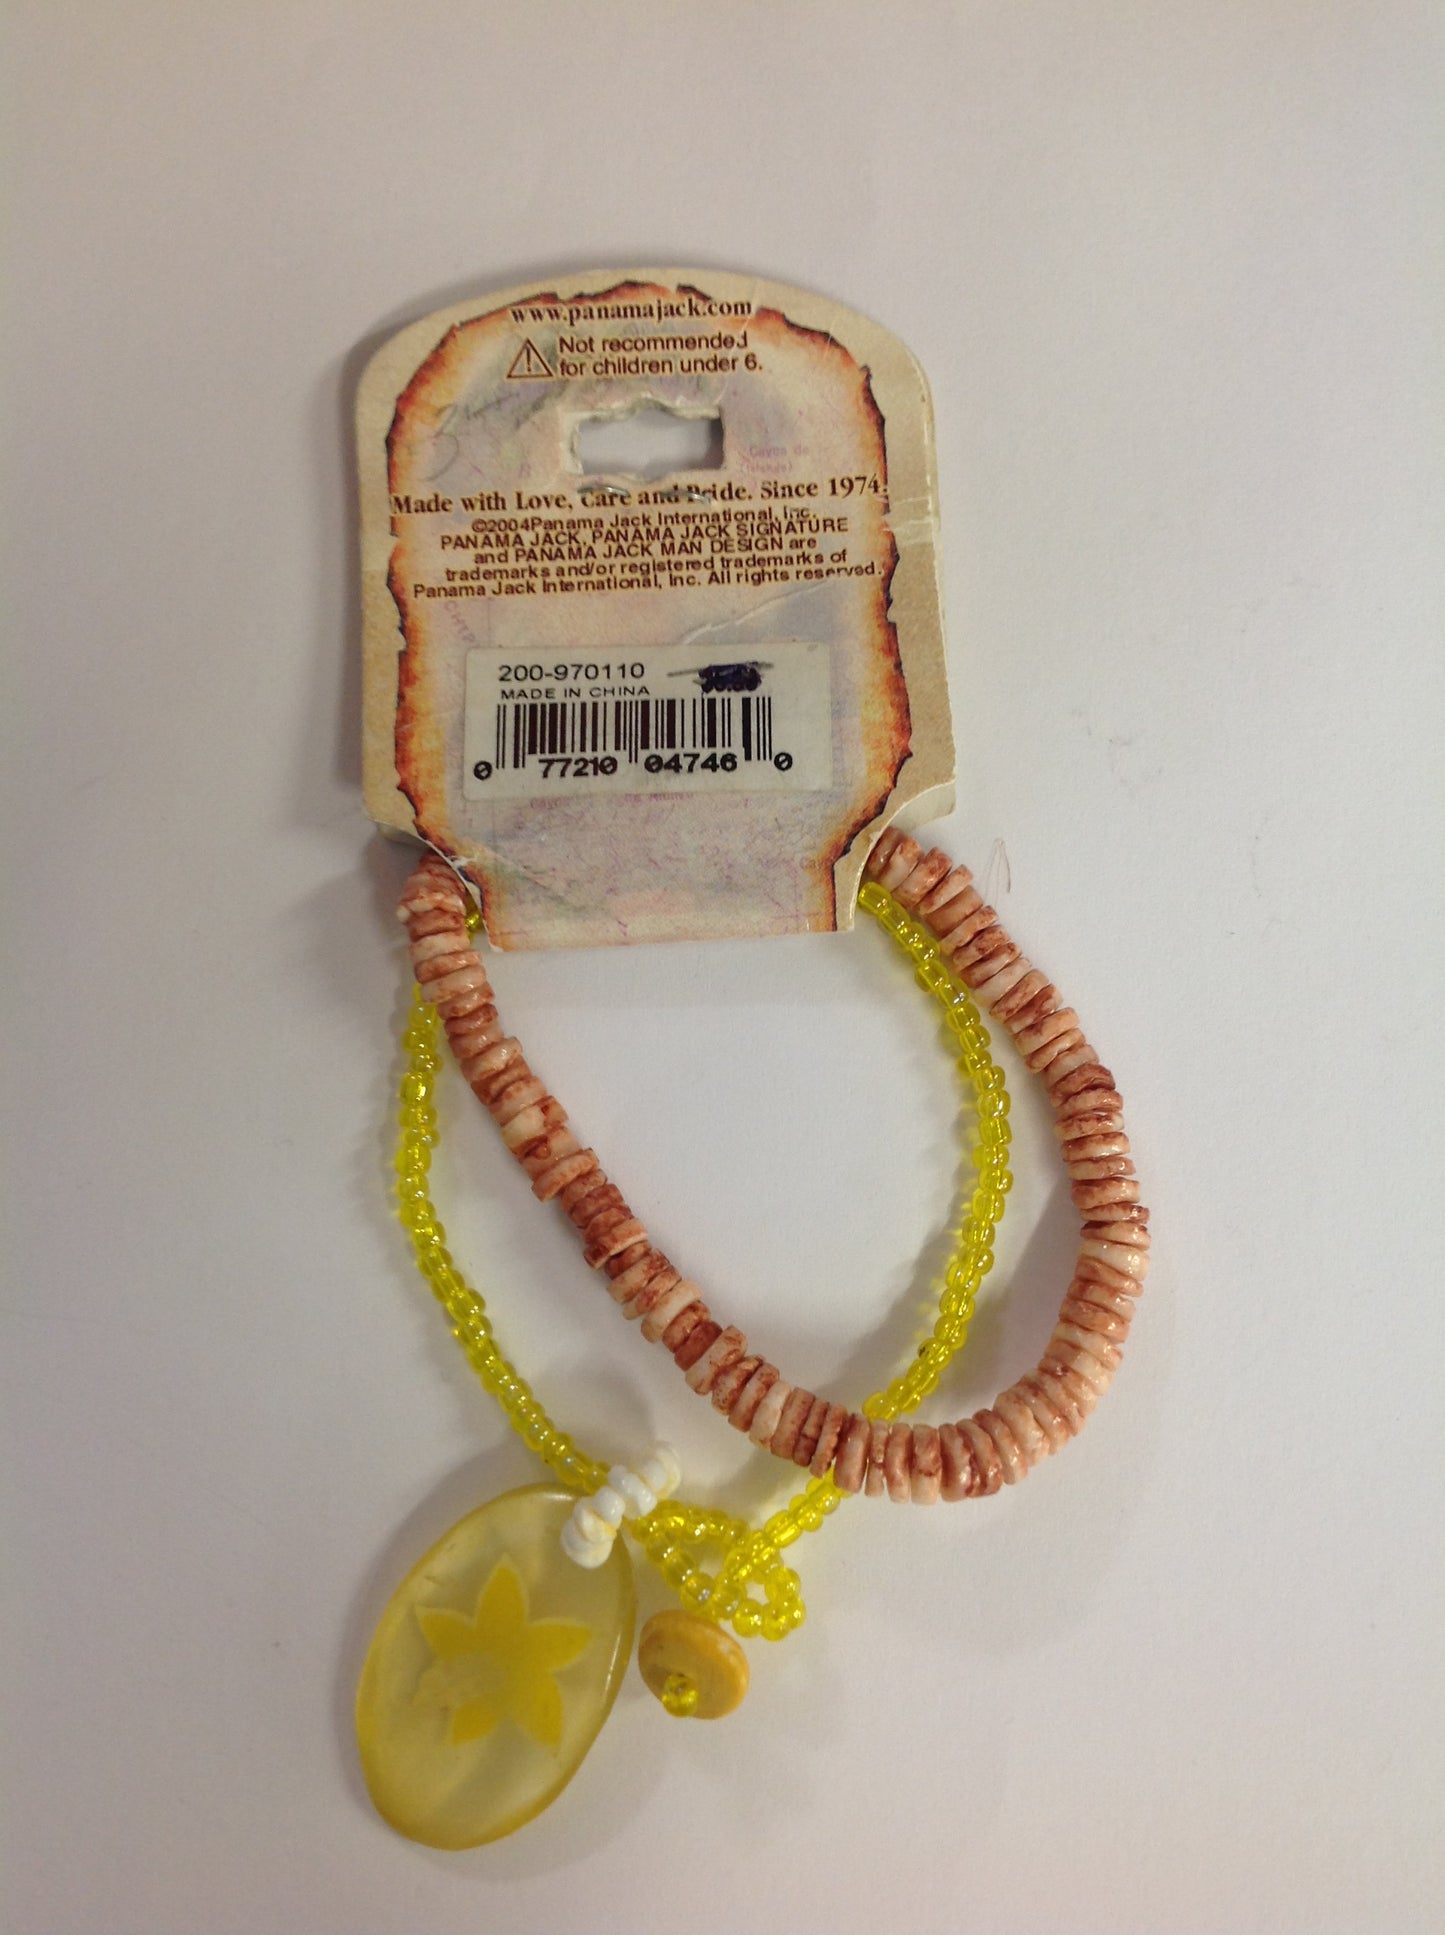 Vintage Authentic Panama Jack Duo Ankle Bracelets in Pink Stone and Yellow Beads with Tropical Orchid Pendant